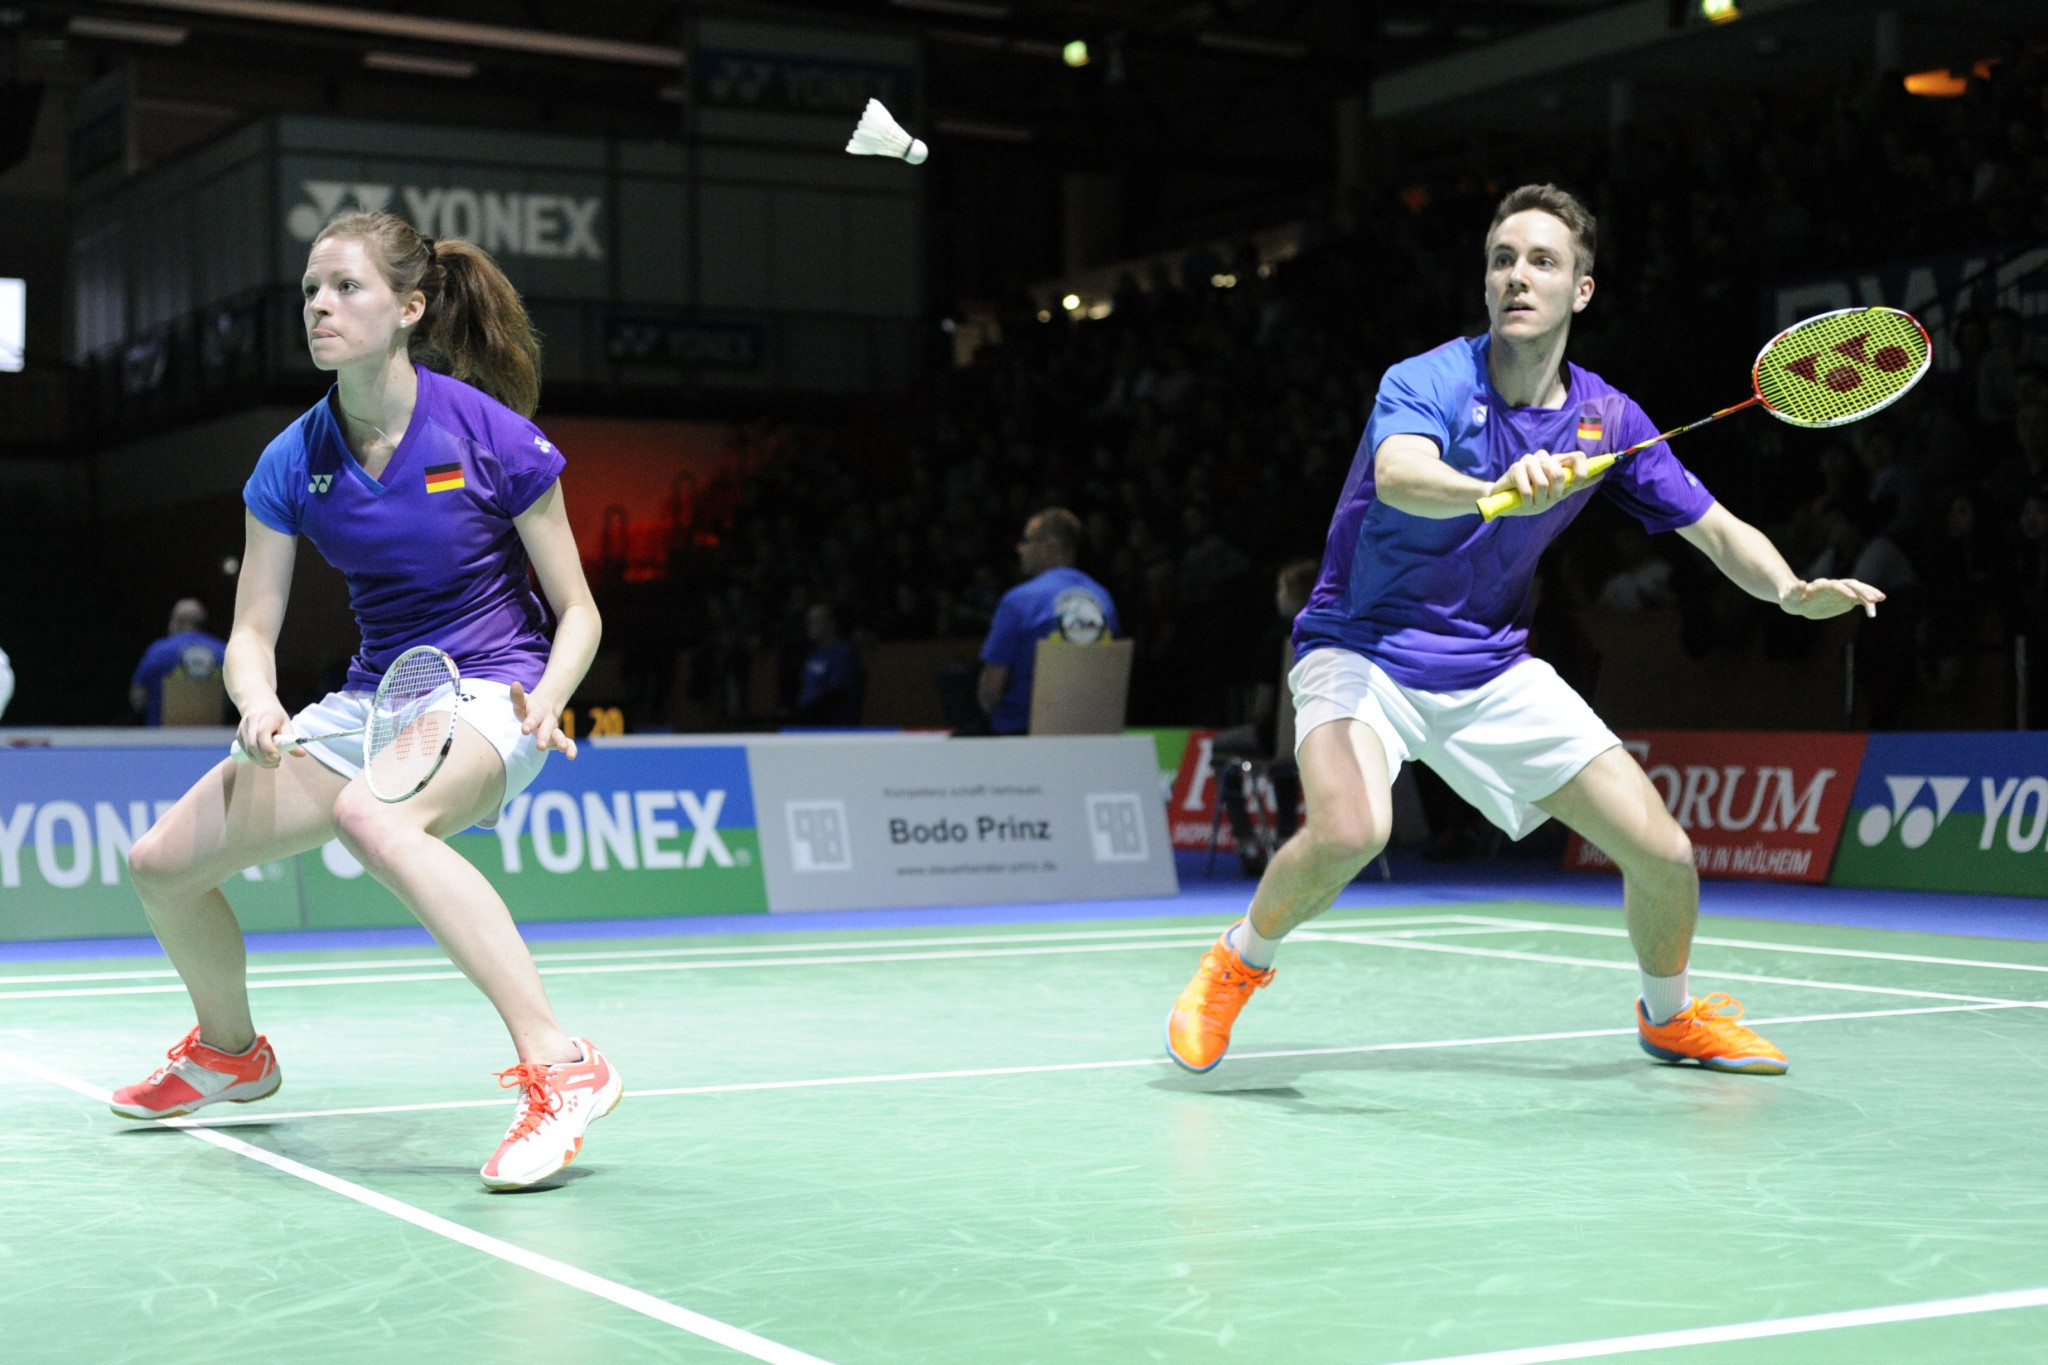 Mark Lamsfuss and Isabel Herttrich were the first victims in a day of shocks at the BWF Orléans Masters ©YONEX German Open